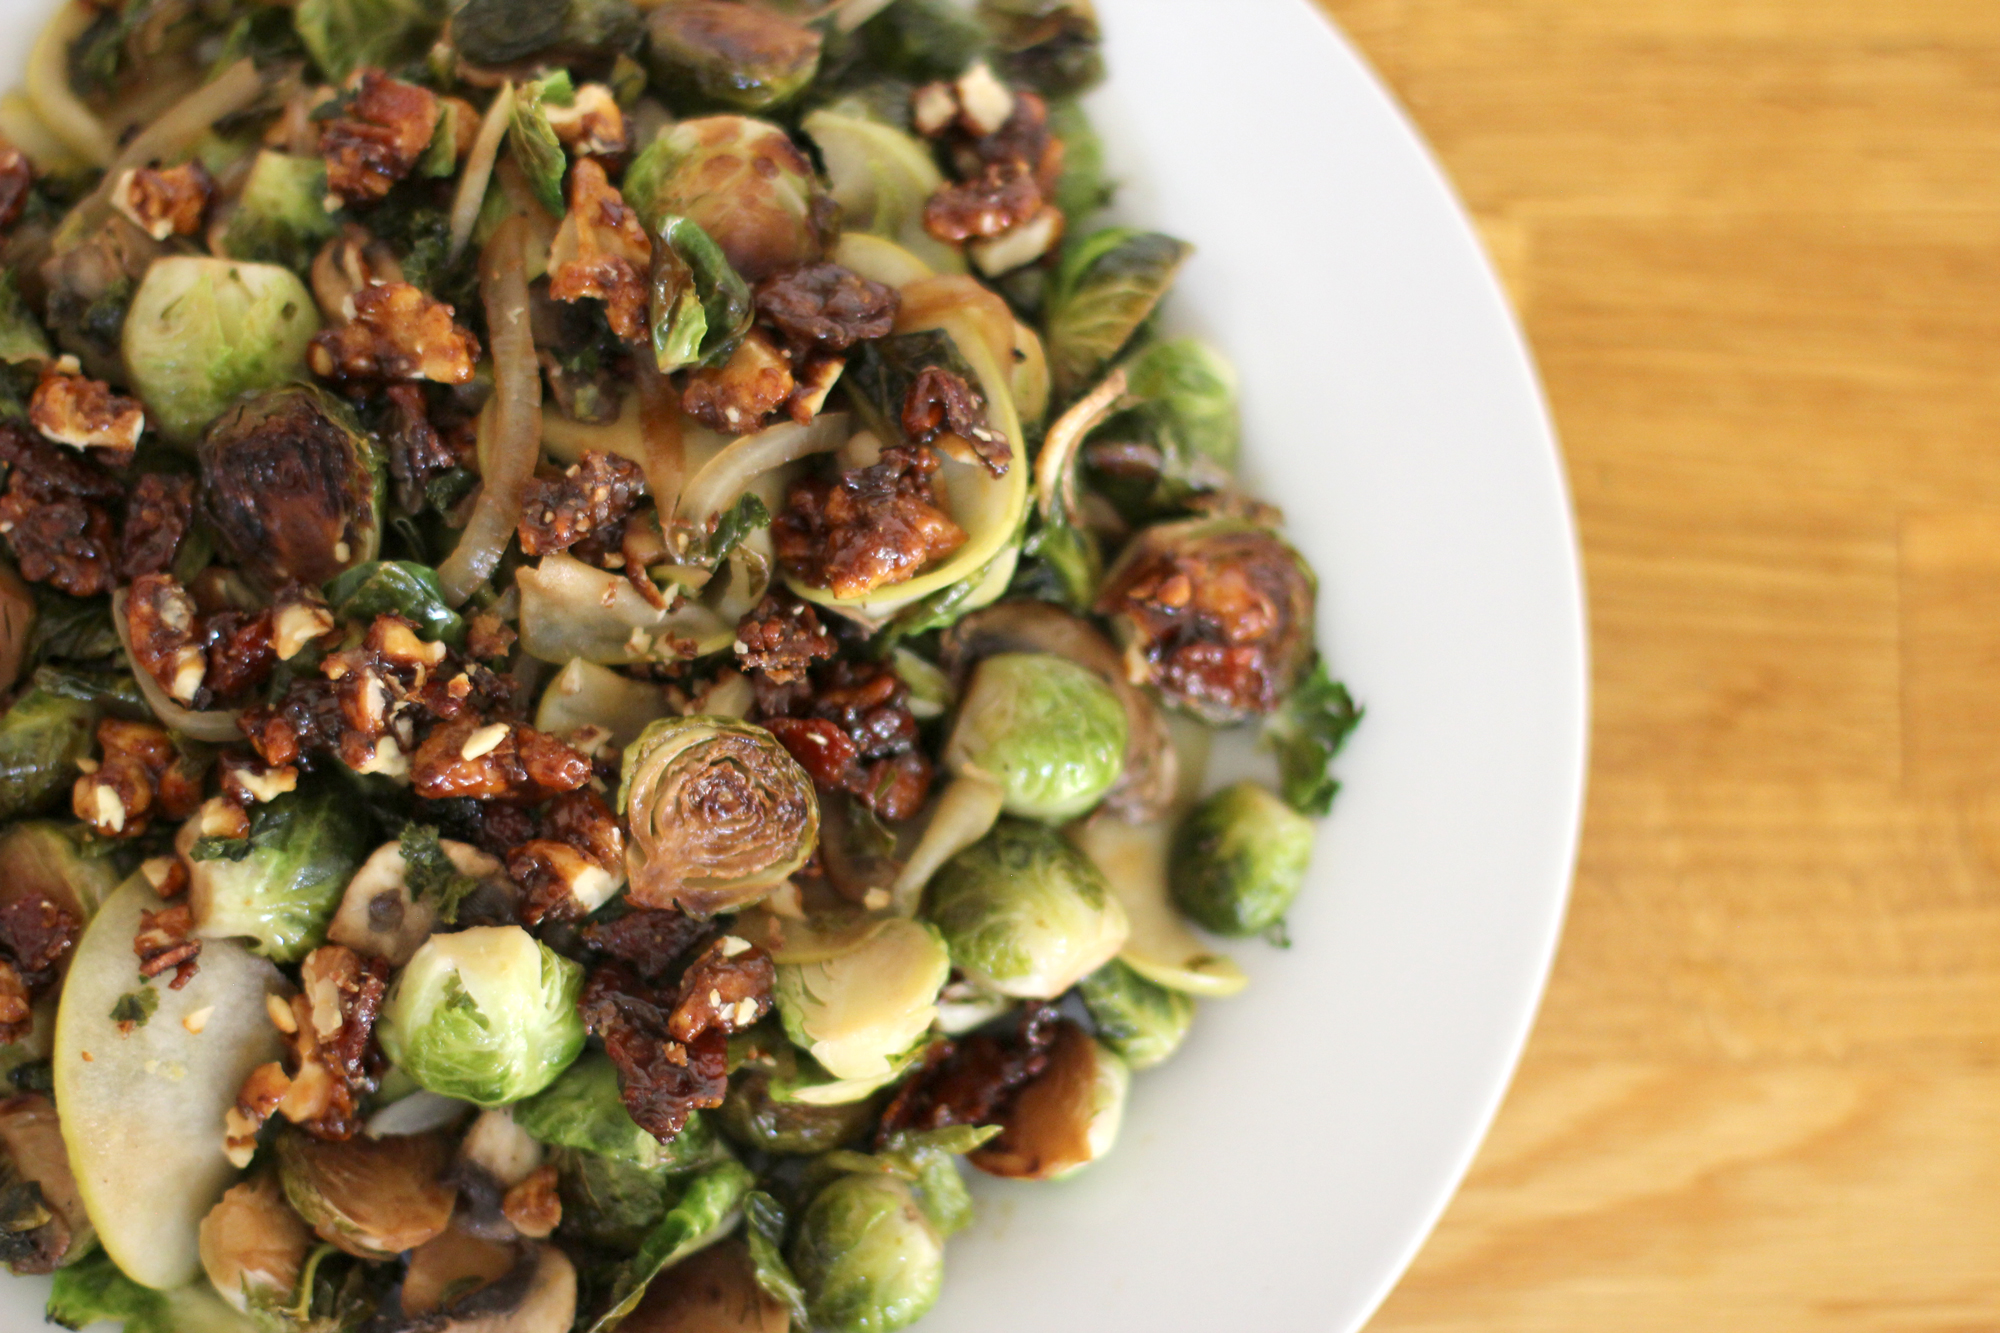 How to Make Brussels Sprouts with Candied Bacon and Walnuts (plus green apples, onions, mushrooms, and kale all tossed in a balsamic glaze!)